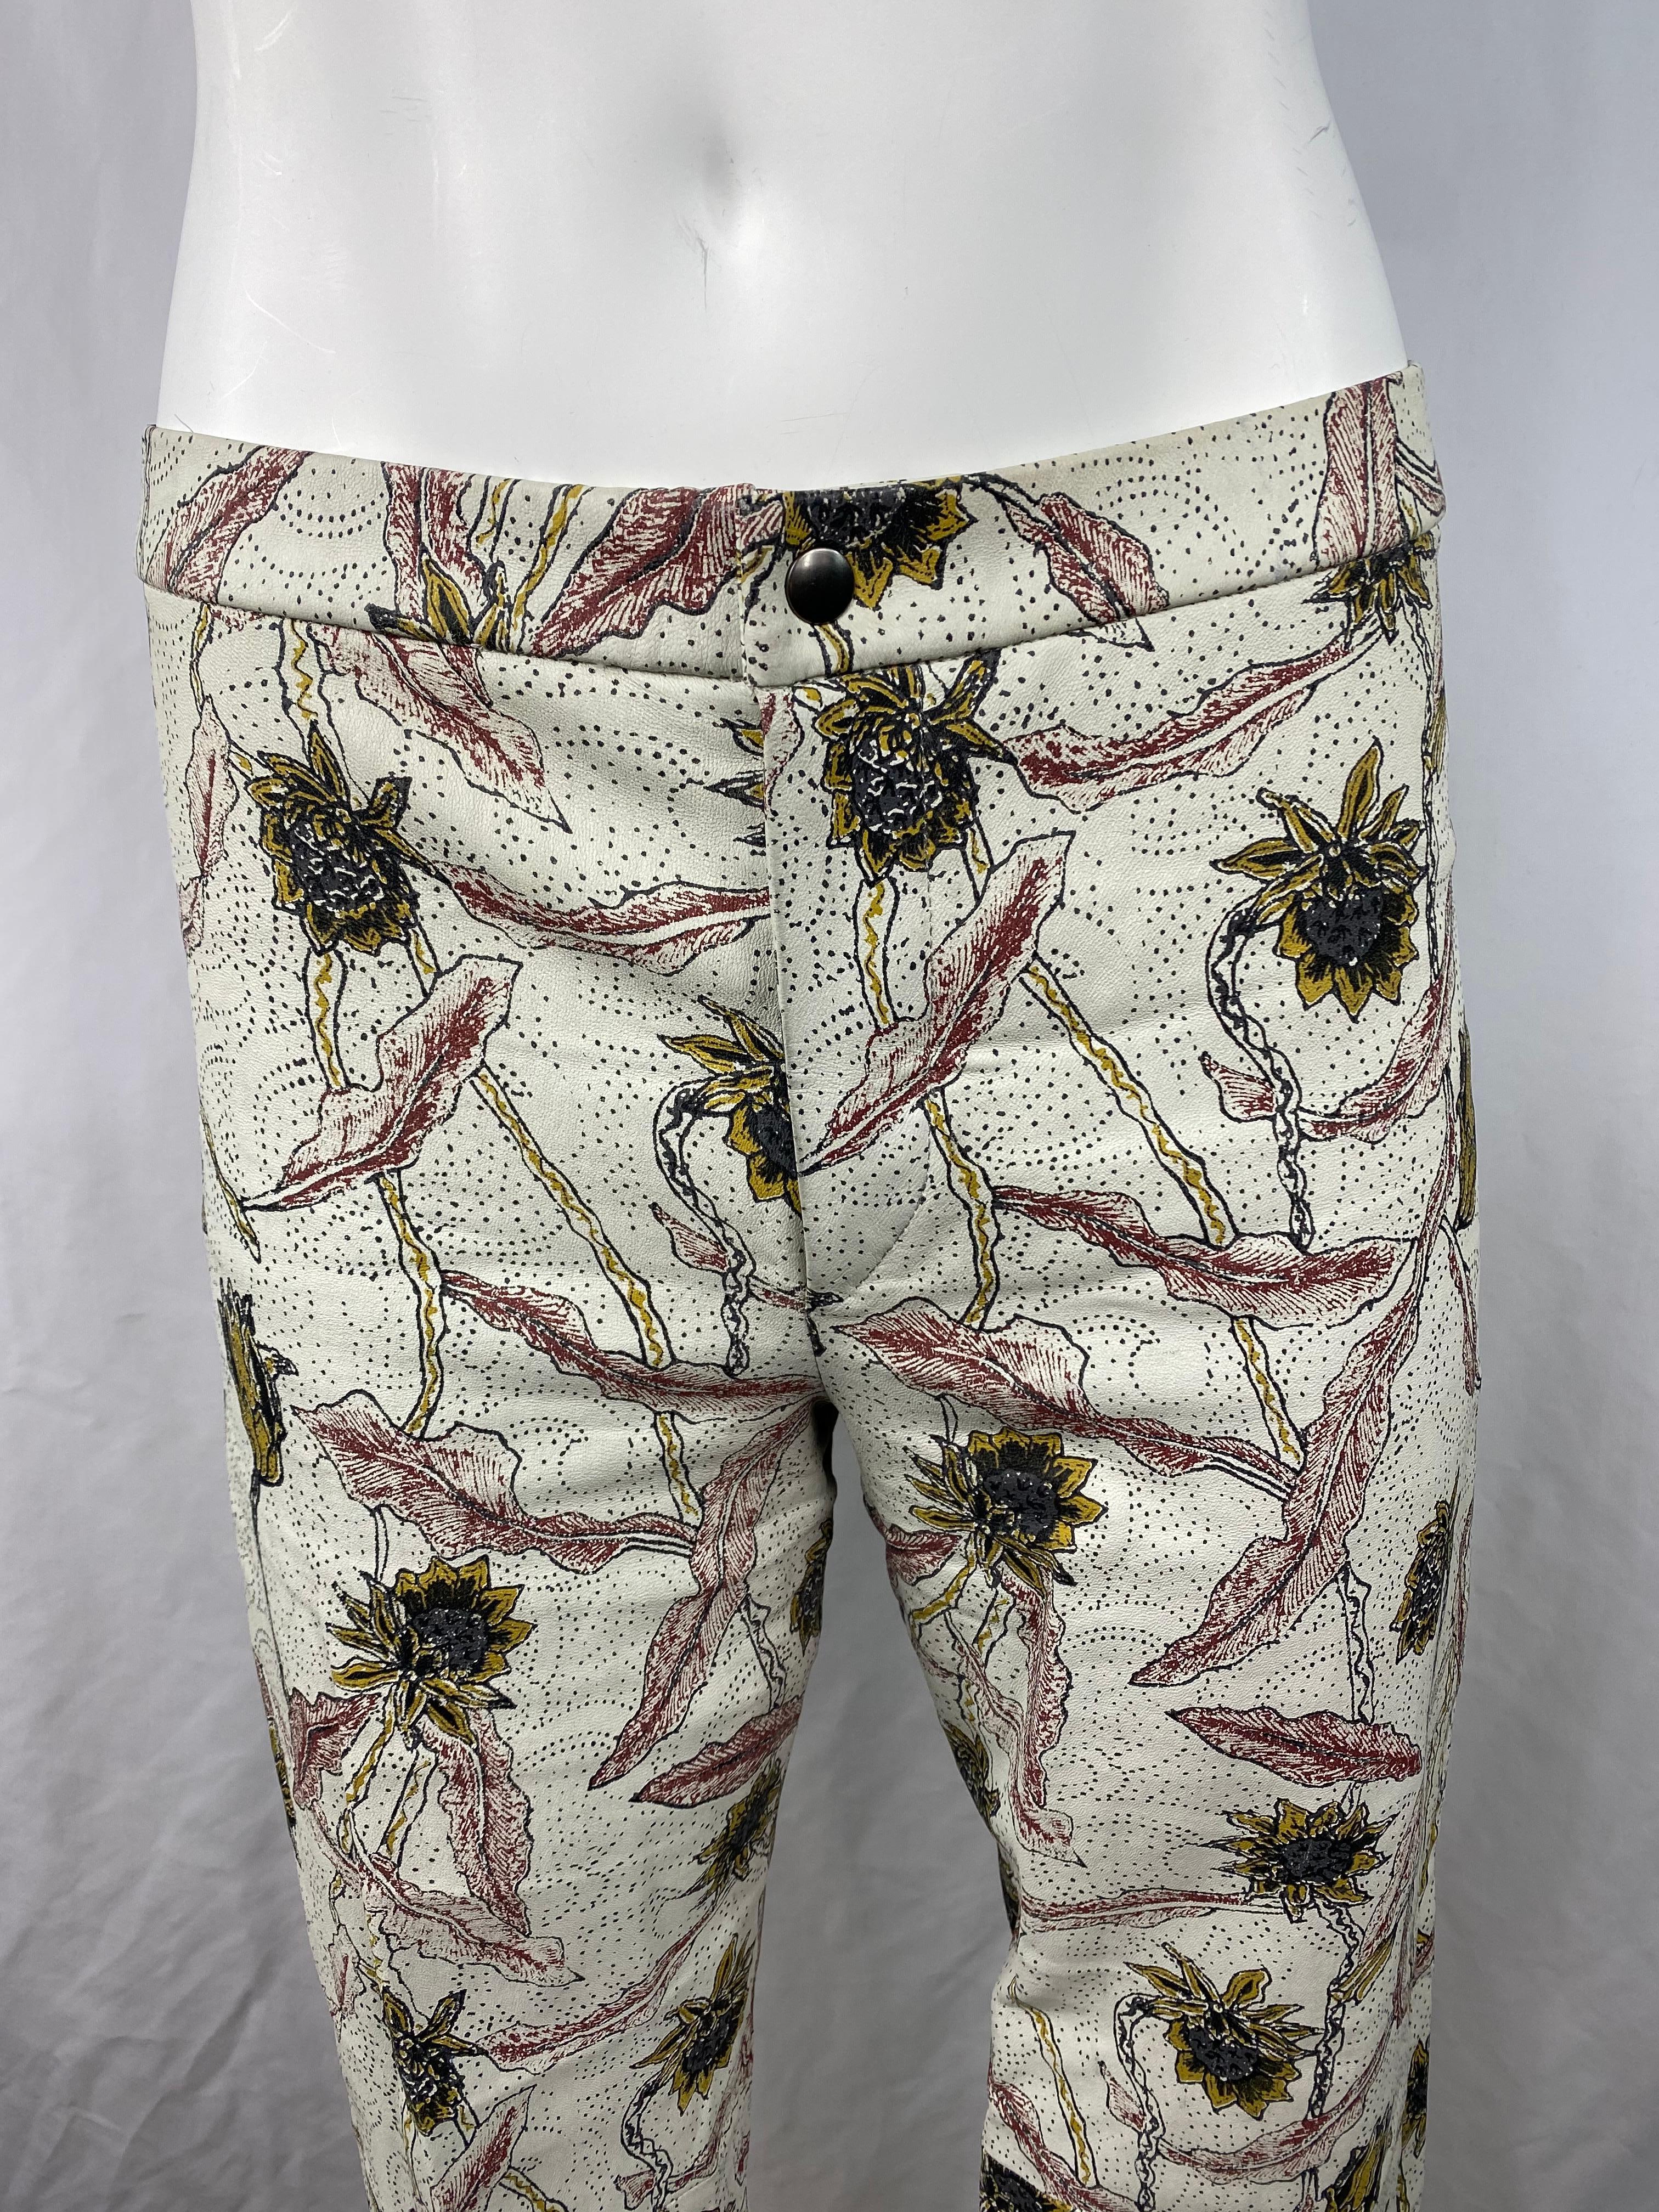 Product details:

The pants are made out of 100% lambskin leather, they feature floral print, straight leg fit with front button and zip closure and side slip detail (7 inches long). Made in France.